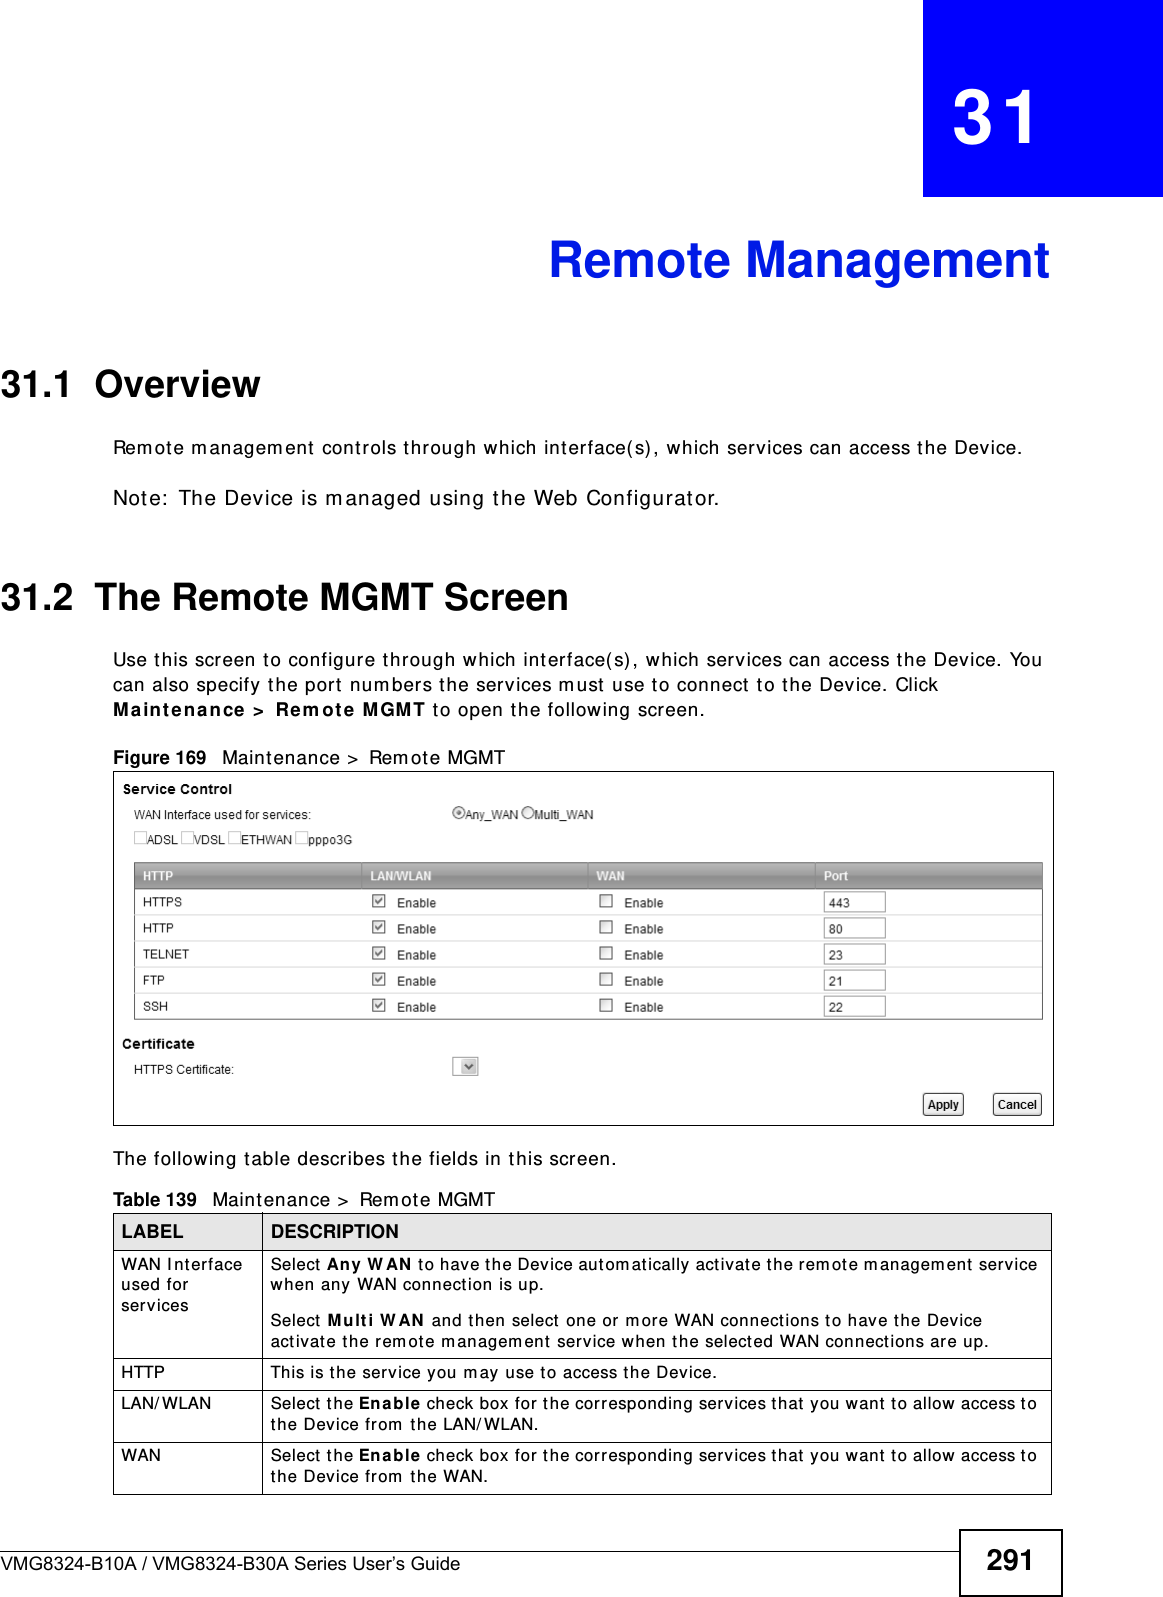 VMG8324-B10A / VMG8324-B30A Series User’s Guide 291CHAPTER   31Remote Management31.1  OverviewRem ote m anagem ent  controls t hrough which interface( s) , which services can access the Device. Note:  The Device is m anaged using the Web Configurat or.31.2  The Remote MGMT ScreenUse t his screen t o configure through which interface(s), which services can access t he Device. You can also specify t he port  num bers the services m ust  use to connect  t o t he Device. Click Ma int ena nce  &gt;  Rem ote  MGM T to open the follow ing screen. Figure 169   Maintenance &gt;  Rem ot e MGMT The following t able describes the fields in this screen. Table 139   Maint enance &gt;  Rem ote MGMT LABEL DESCRIPTIONWAN I nterface used for servicesSelect An y  W AN  t o have t he Device aut om at ically activat e the rem ot e m anagem ent service when any WAN connect ion is up.Select M u lt i W AN  and t hen select one or m ore WAN connections t o have t he Device act ivate t he r em ote m anagem ent  service when the select ed WAN connections are up.HTTP This is t he service you m ay use to access the Device.LAN/ WLAN Select t he En a ble  check box for  the correspond in g  ser v ices t h at  you want  to allow  access t o t he Device from  the LAN/ WLAN.WAN Select  the Enable check box for t he correspond in g ser vices t h at  y ou  w ant  to allow access to t he Device from  the WAN.